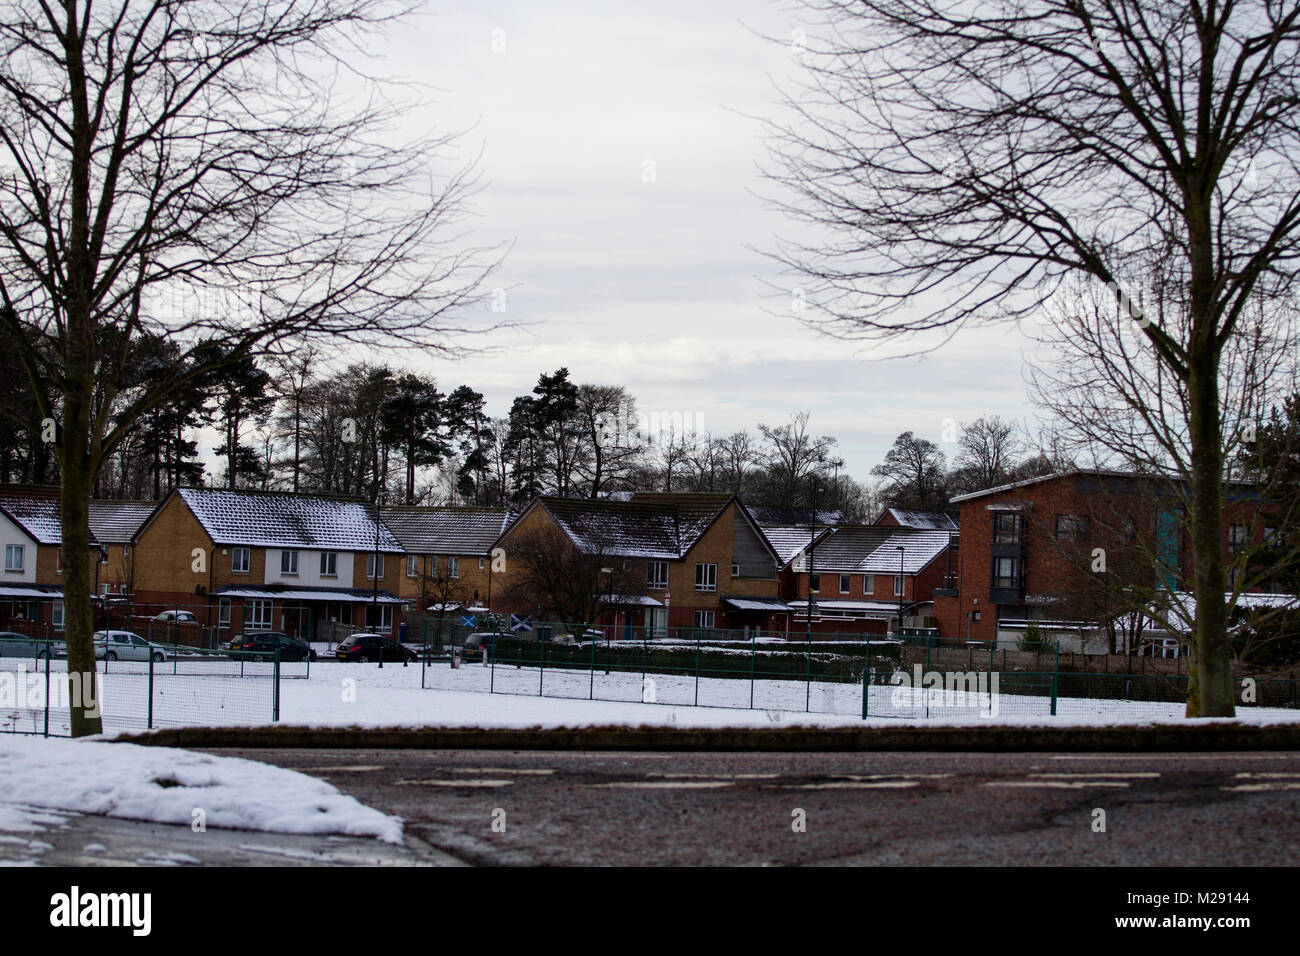 Dundee, Scotland, UK. 6th February, 2018. UK weather: Freezing temperatures brings overnight snow across North East Scotland. Snow covered Ardler Village housing Estate in Dundee, UK: Credits: Dundee Photographics/Alamy Live News Stock Photo